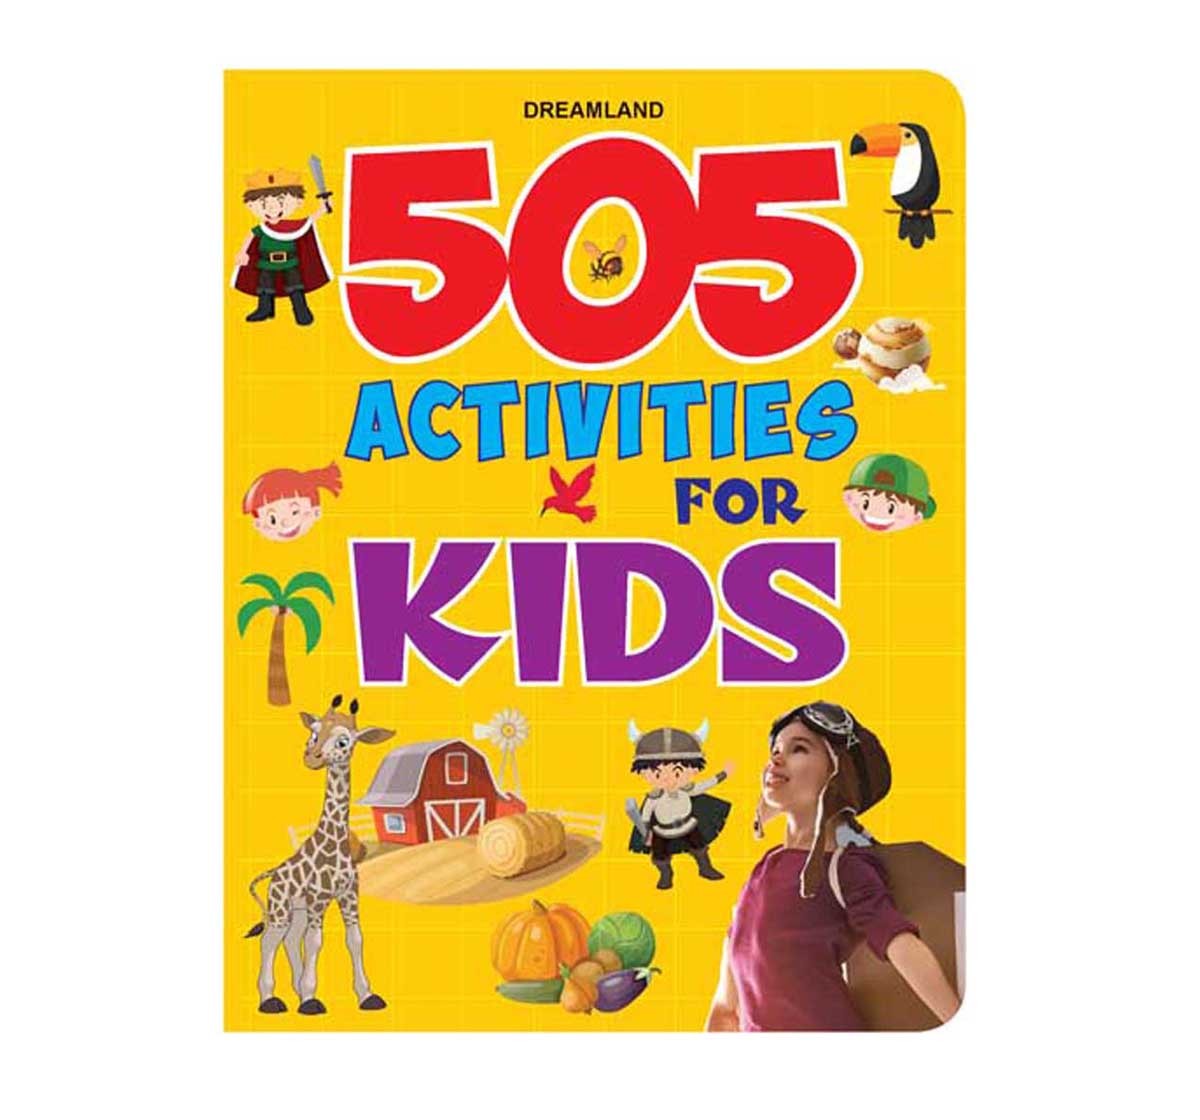 Dreamland Paperback 505 Activities Books for Kids 5Y+, Multicolour